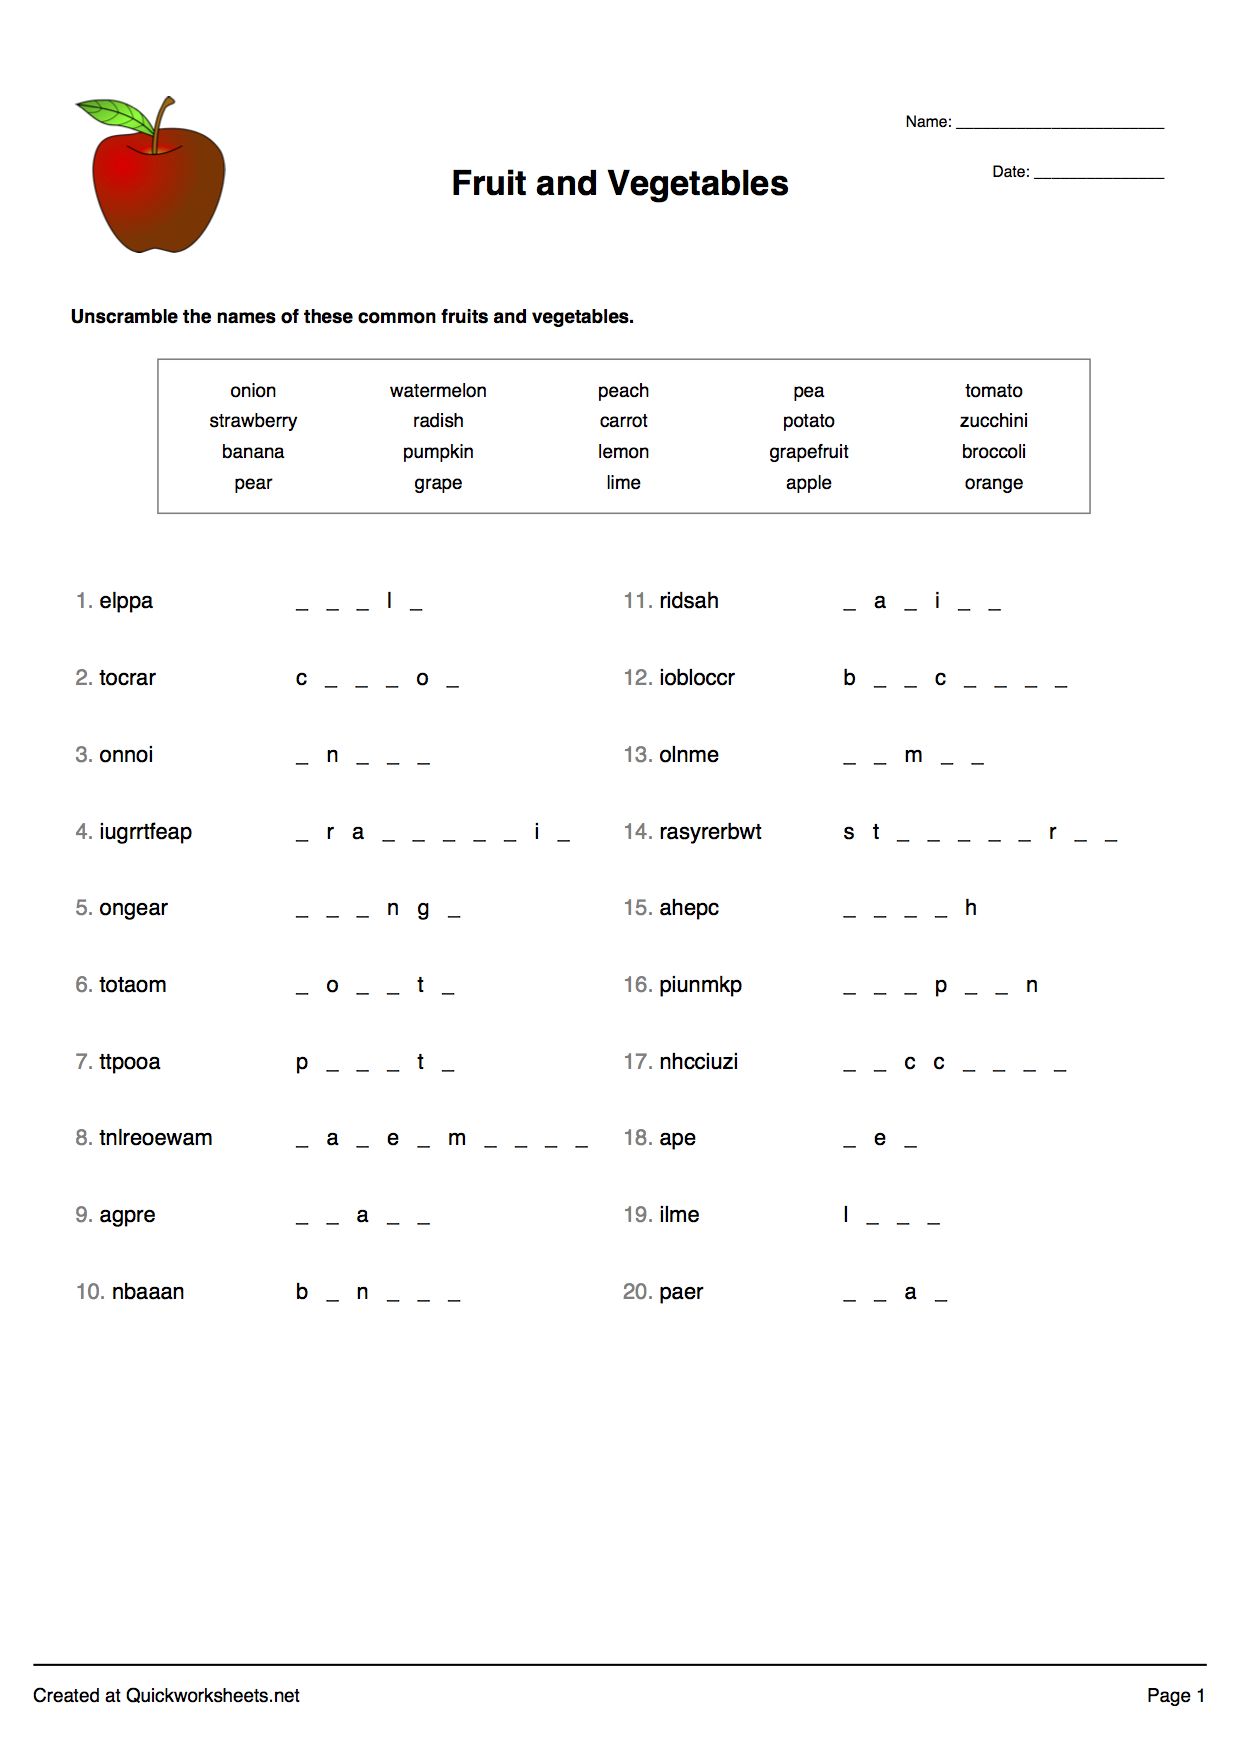 Word Scramble, Wordsearch, Crossword, Matching Pairs And Other - Free Printable Test Maker